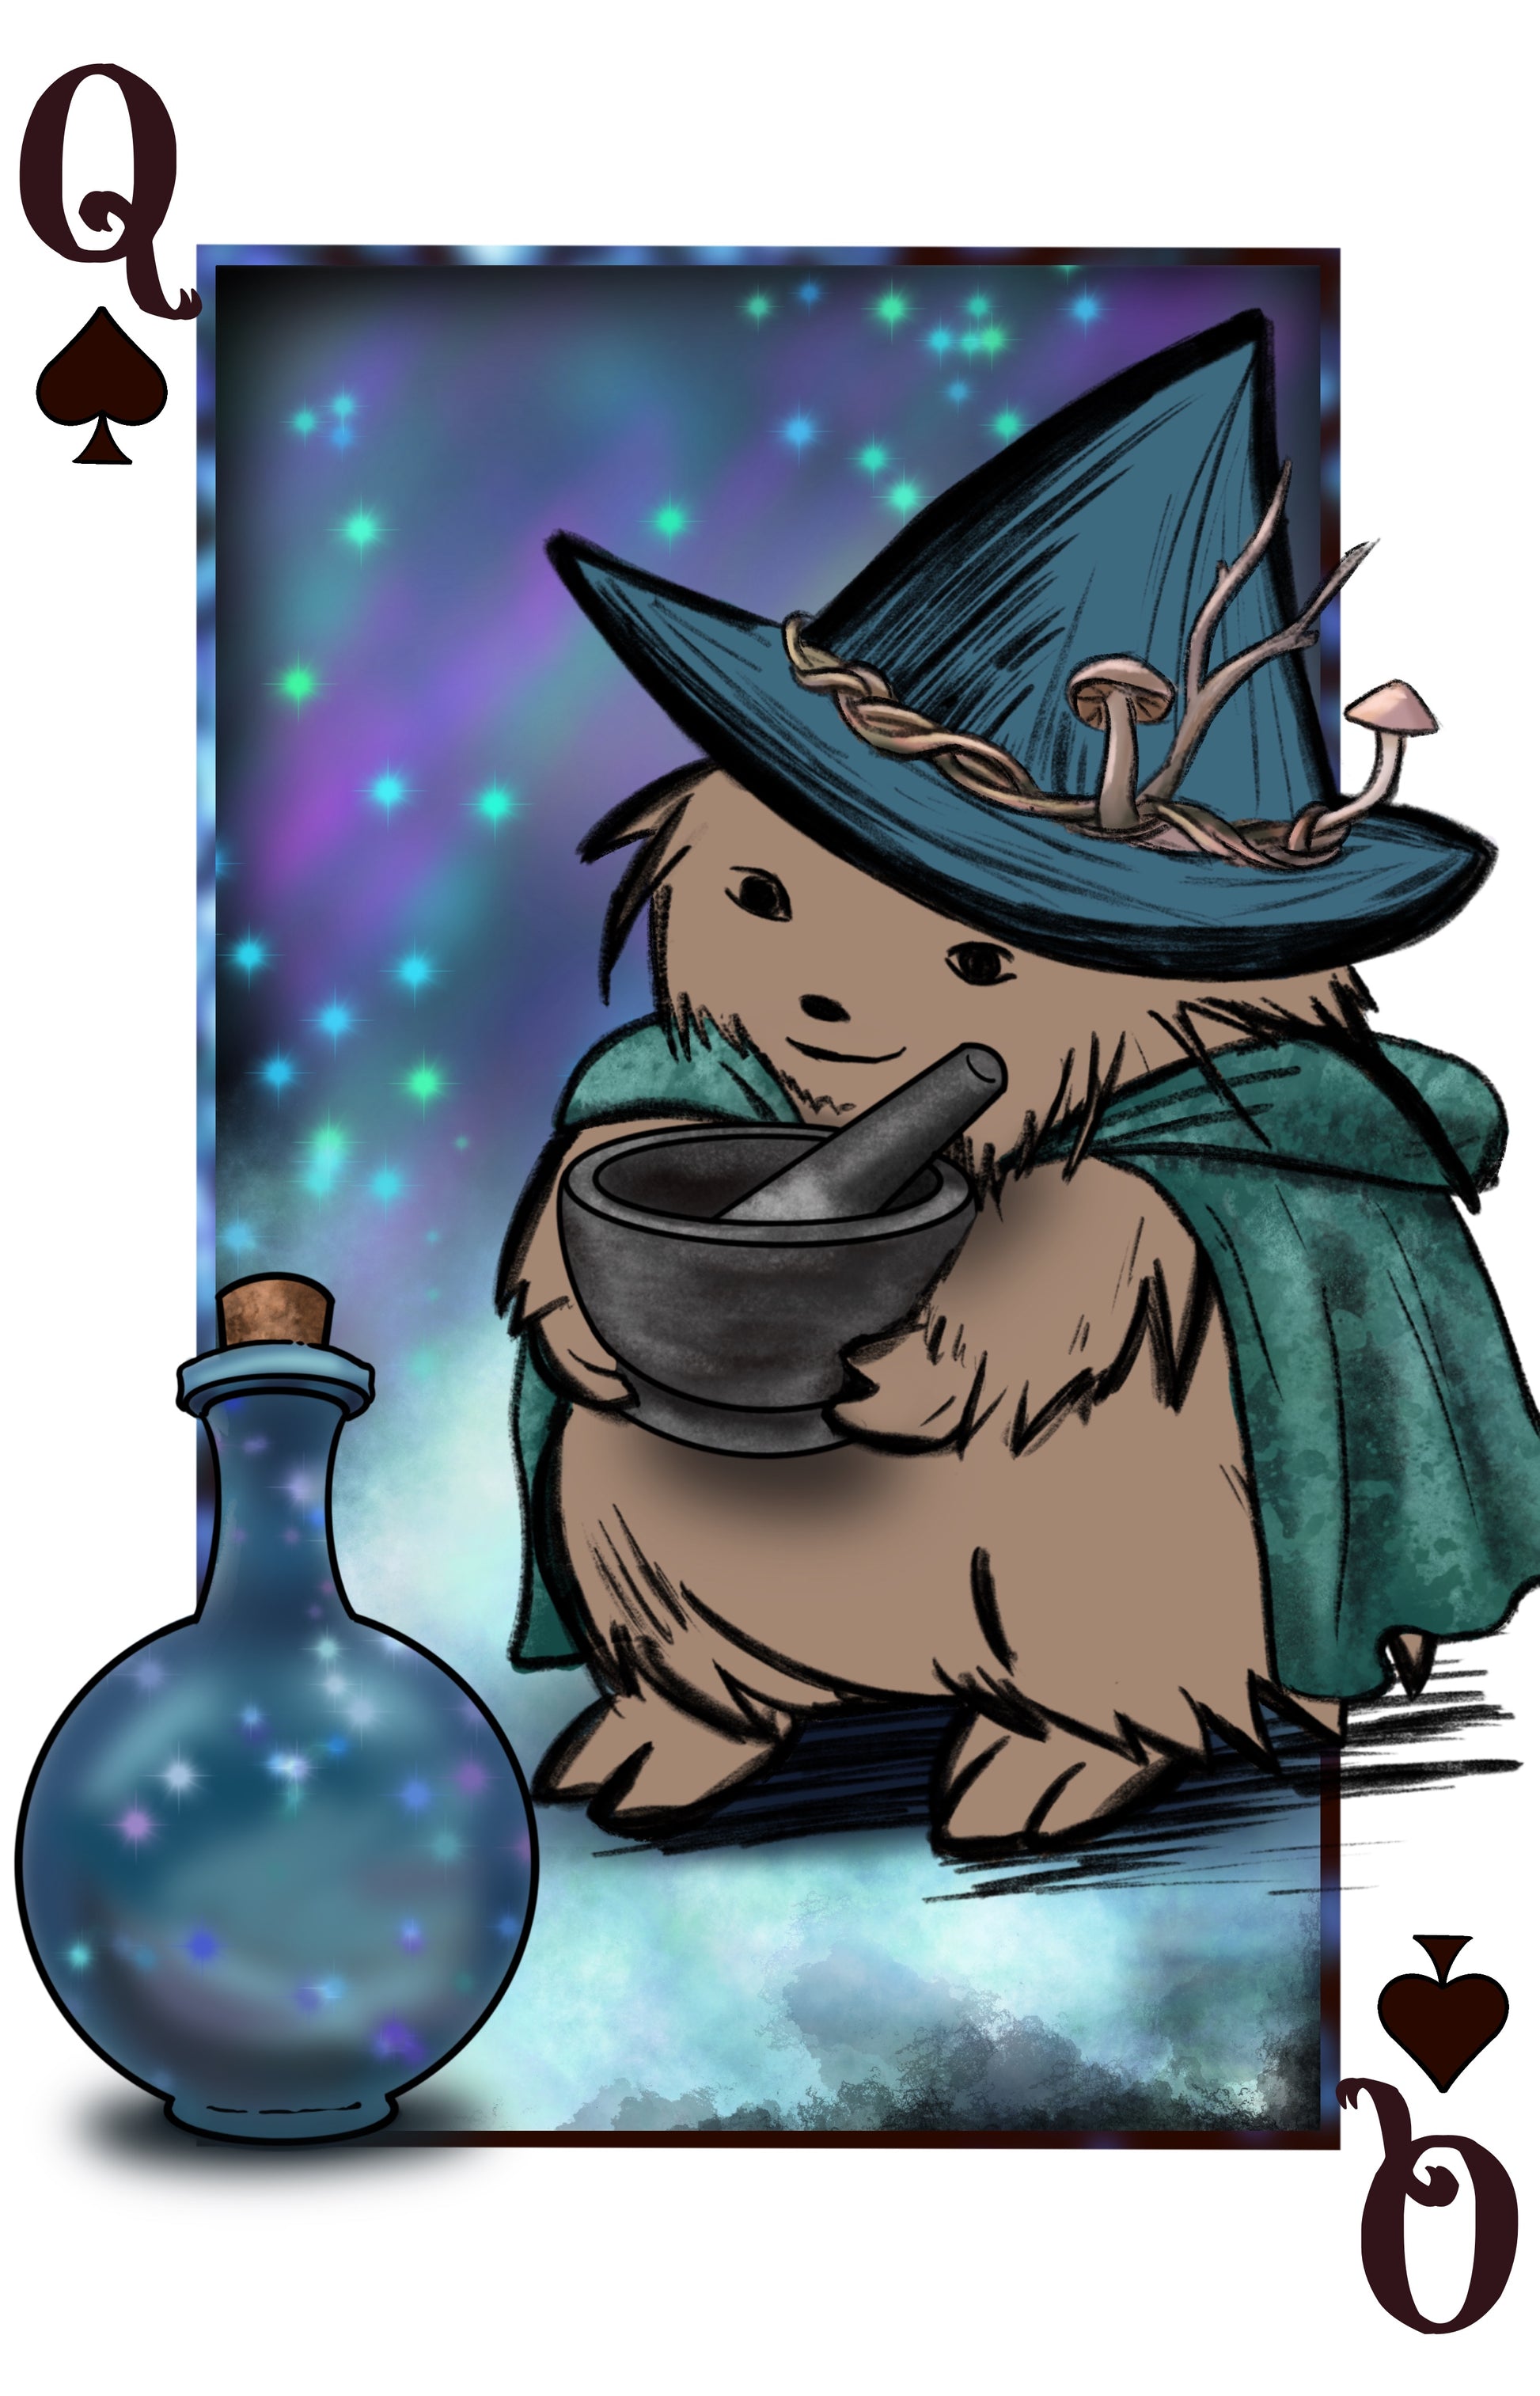 Fantasy themed playing cards. The queen of spades is a hedge witch named Morgana. She holds a mortar and pestle, wears a cape, and mushrooms in her hat. A potion jar sits in the foreground.